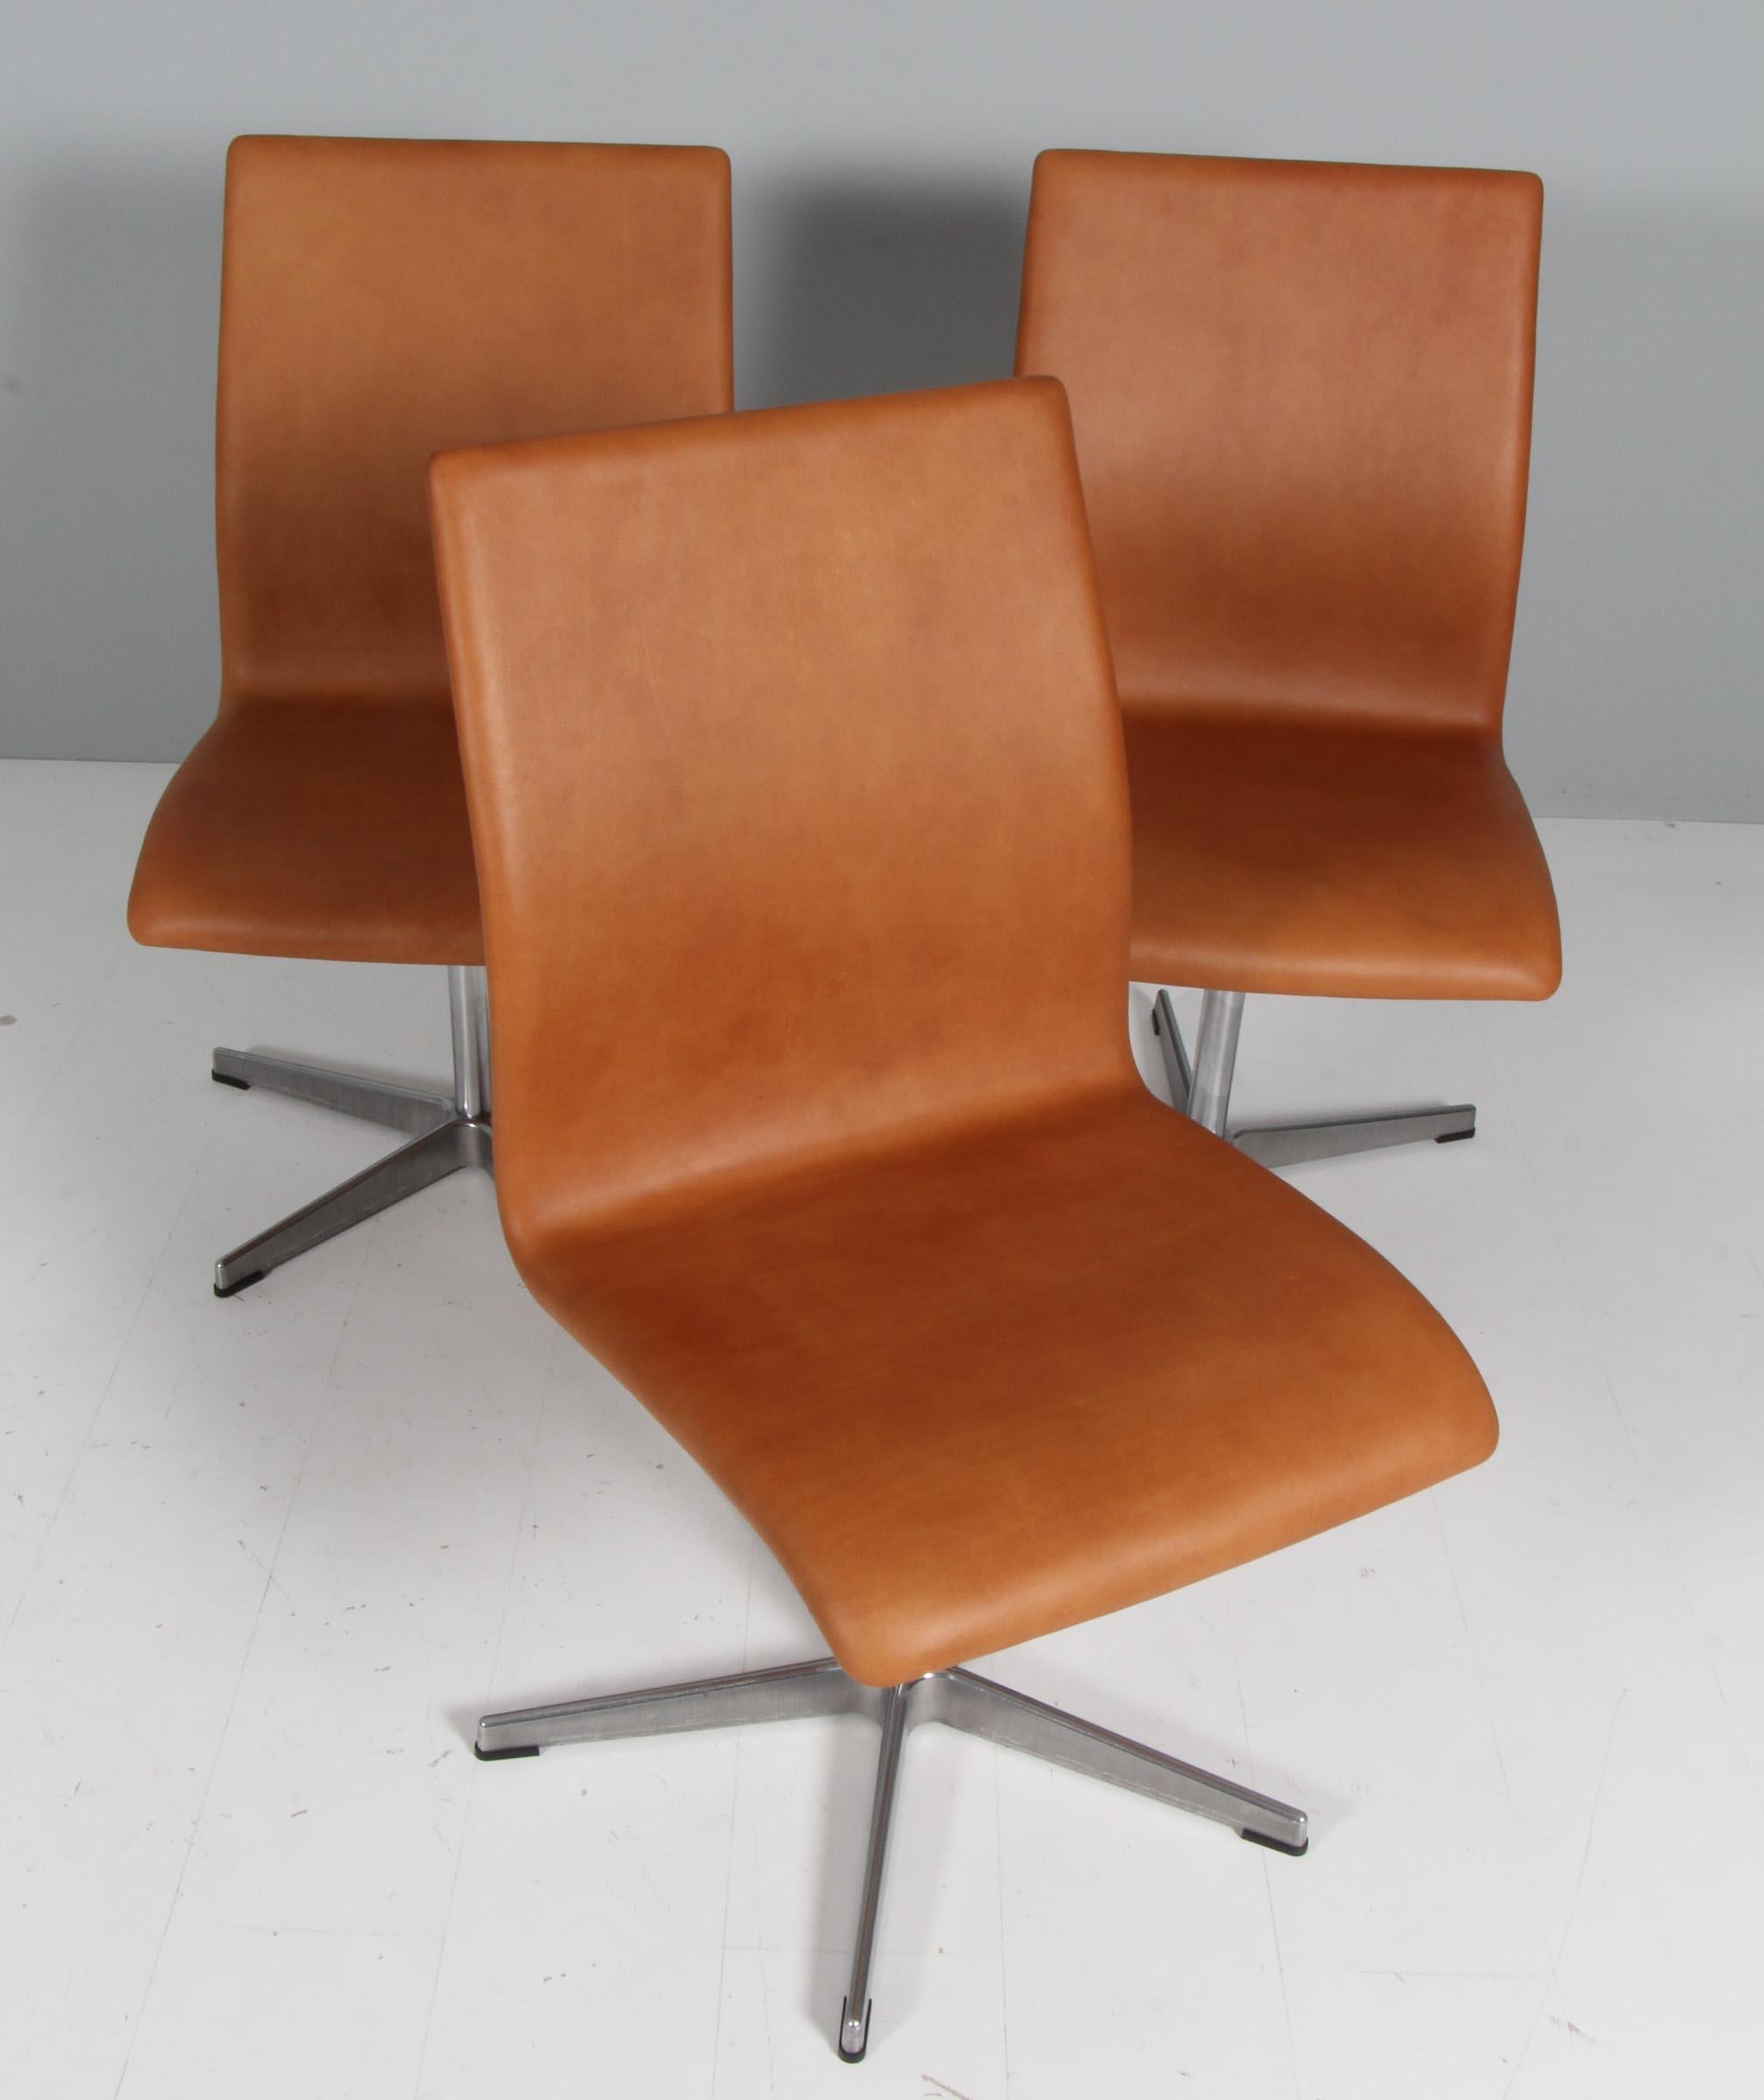 Arne Jacobsen Oxford chair five star base in aluminum.

New upholstered with vintage aniline leather

Made by Fritz Hansen.

Original designed for the Oxford university.